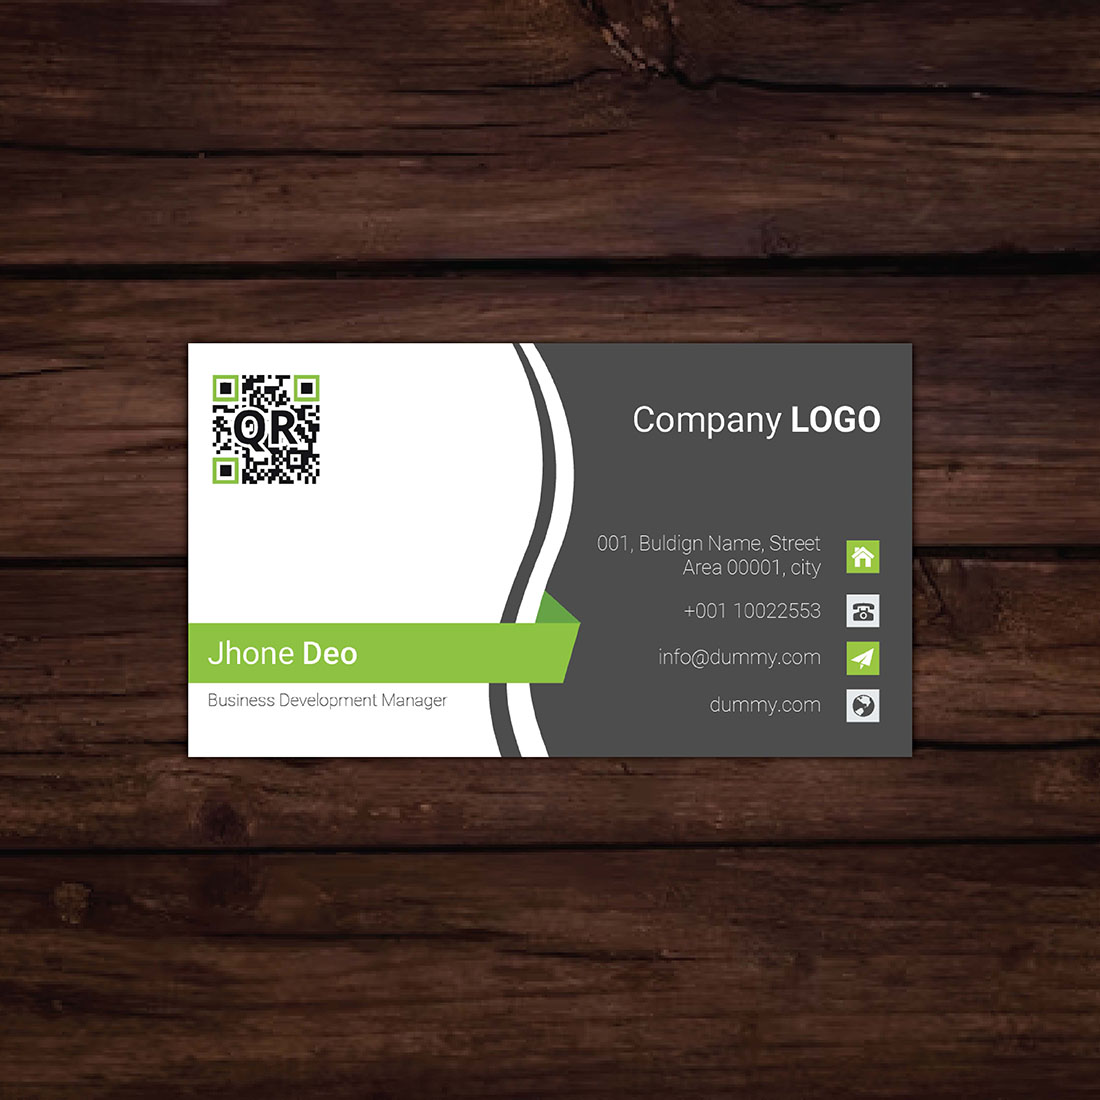 Close up of a business card on a wooden surface.